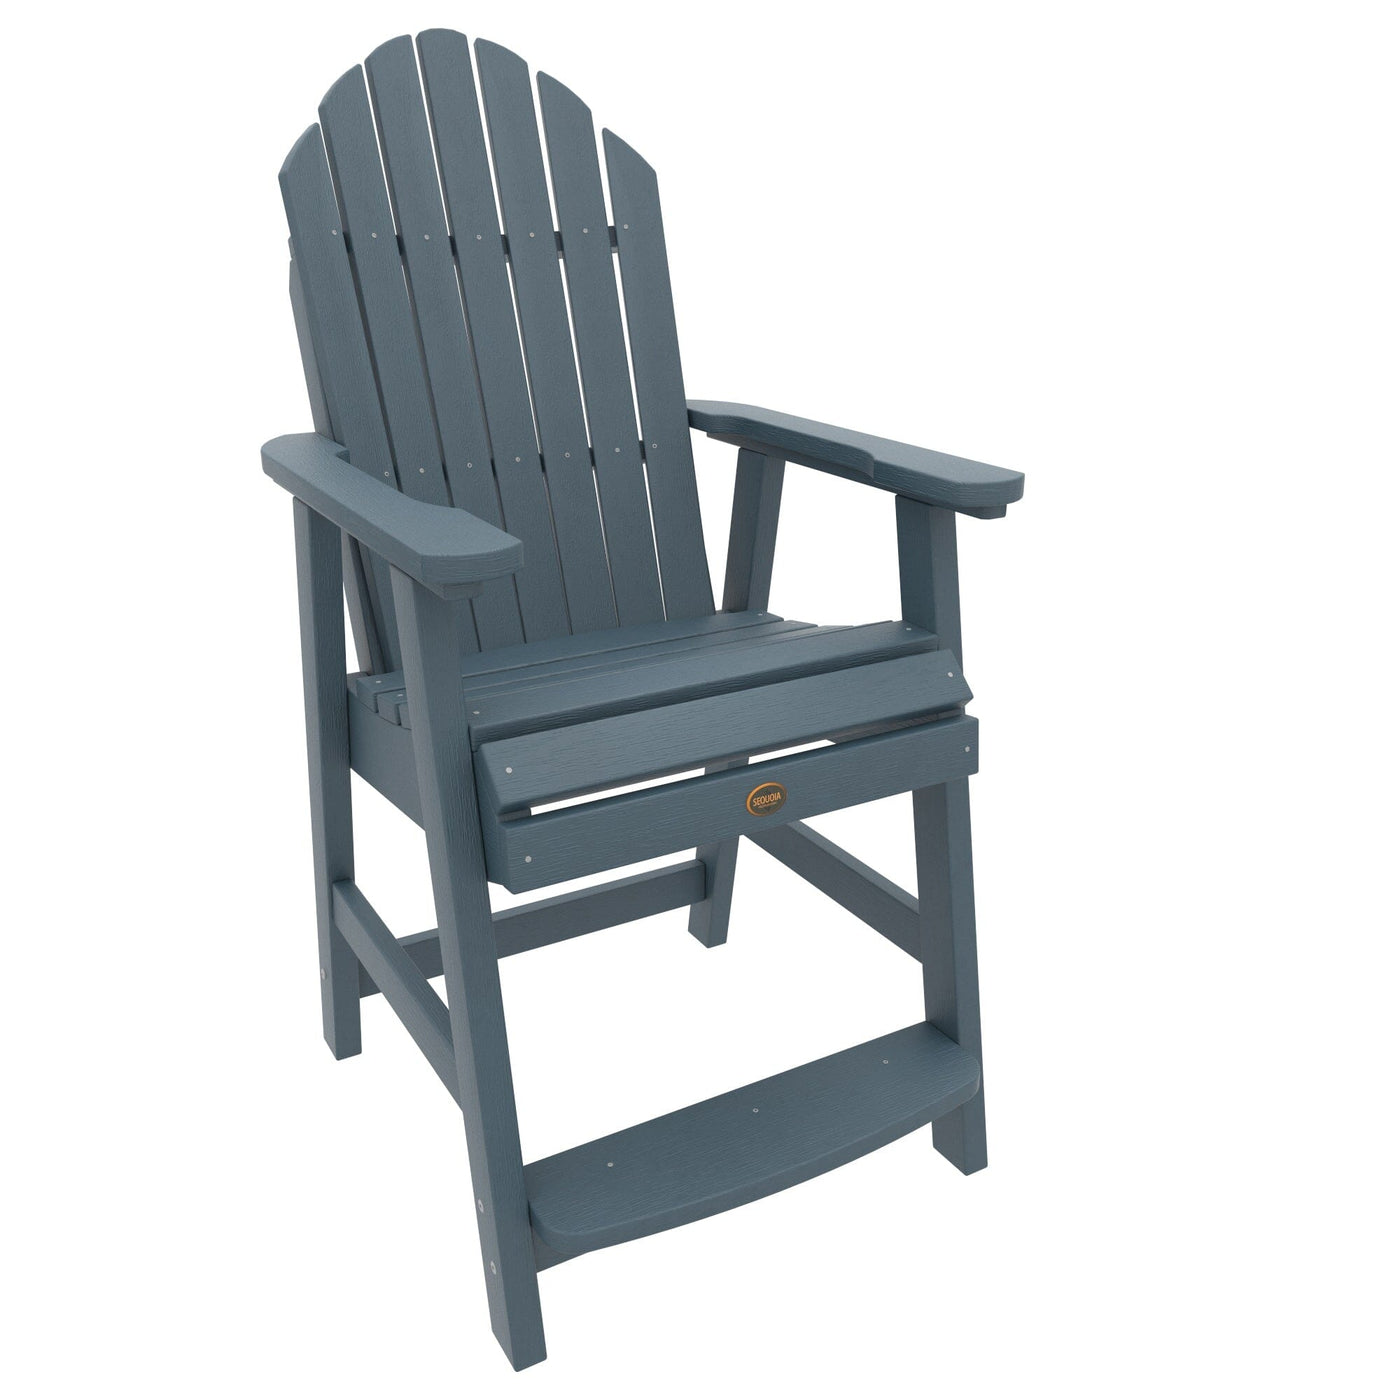 Commercial Grade Muskoka Adirondack Deck Dining Chair in Counter Height Adirondack Chairs Sequoia Professional Nantucket Blue 